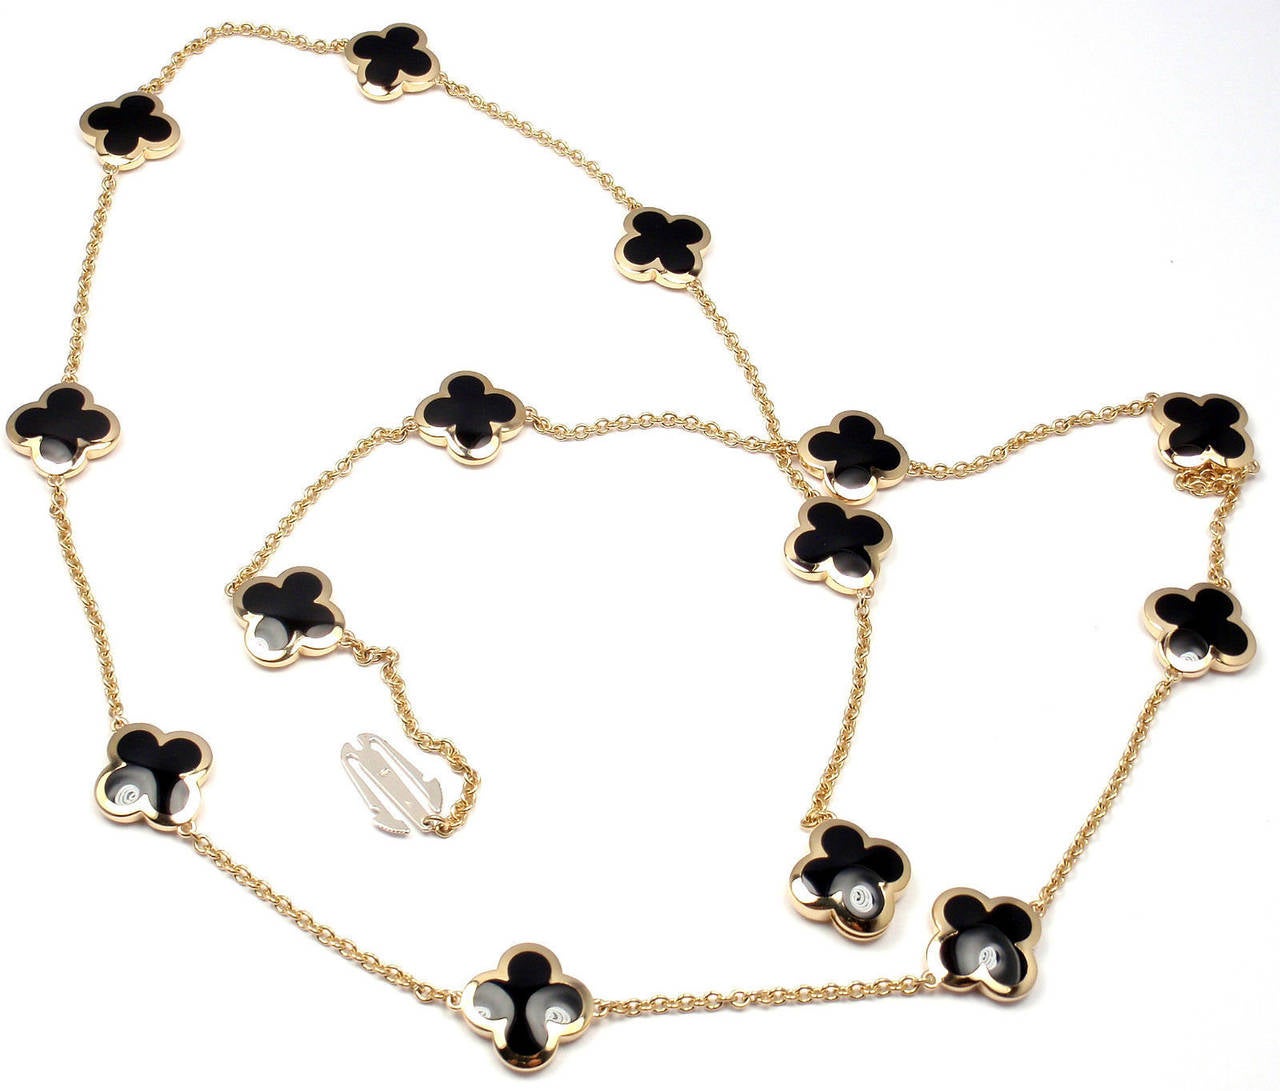 18k Yellow Gold Pure Alhambra Fourteen-Motif Black Onyx Necklace by 
Van Cleef & Arpels.
With 14 motifs of black onyx Pure Alhambra stones, 15mm each.

Details: 
Length: 32